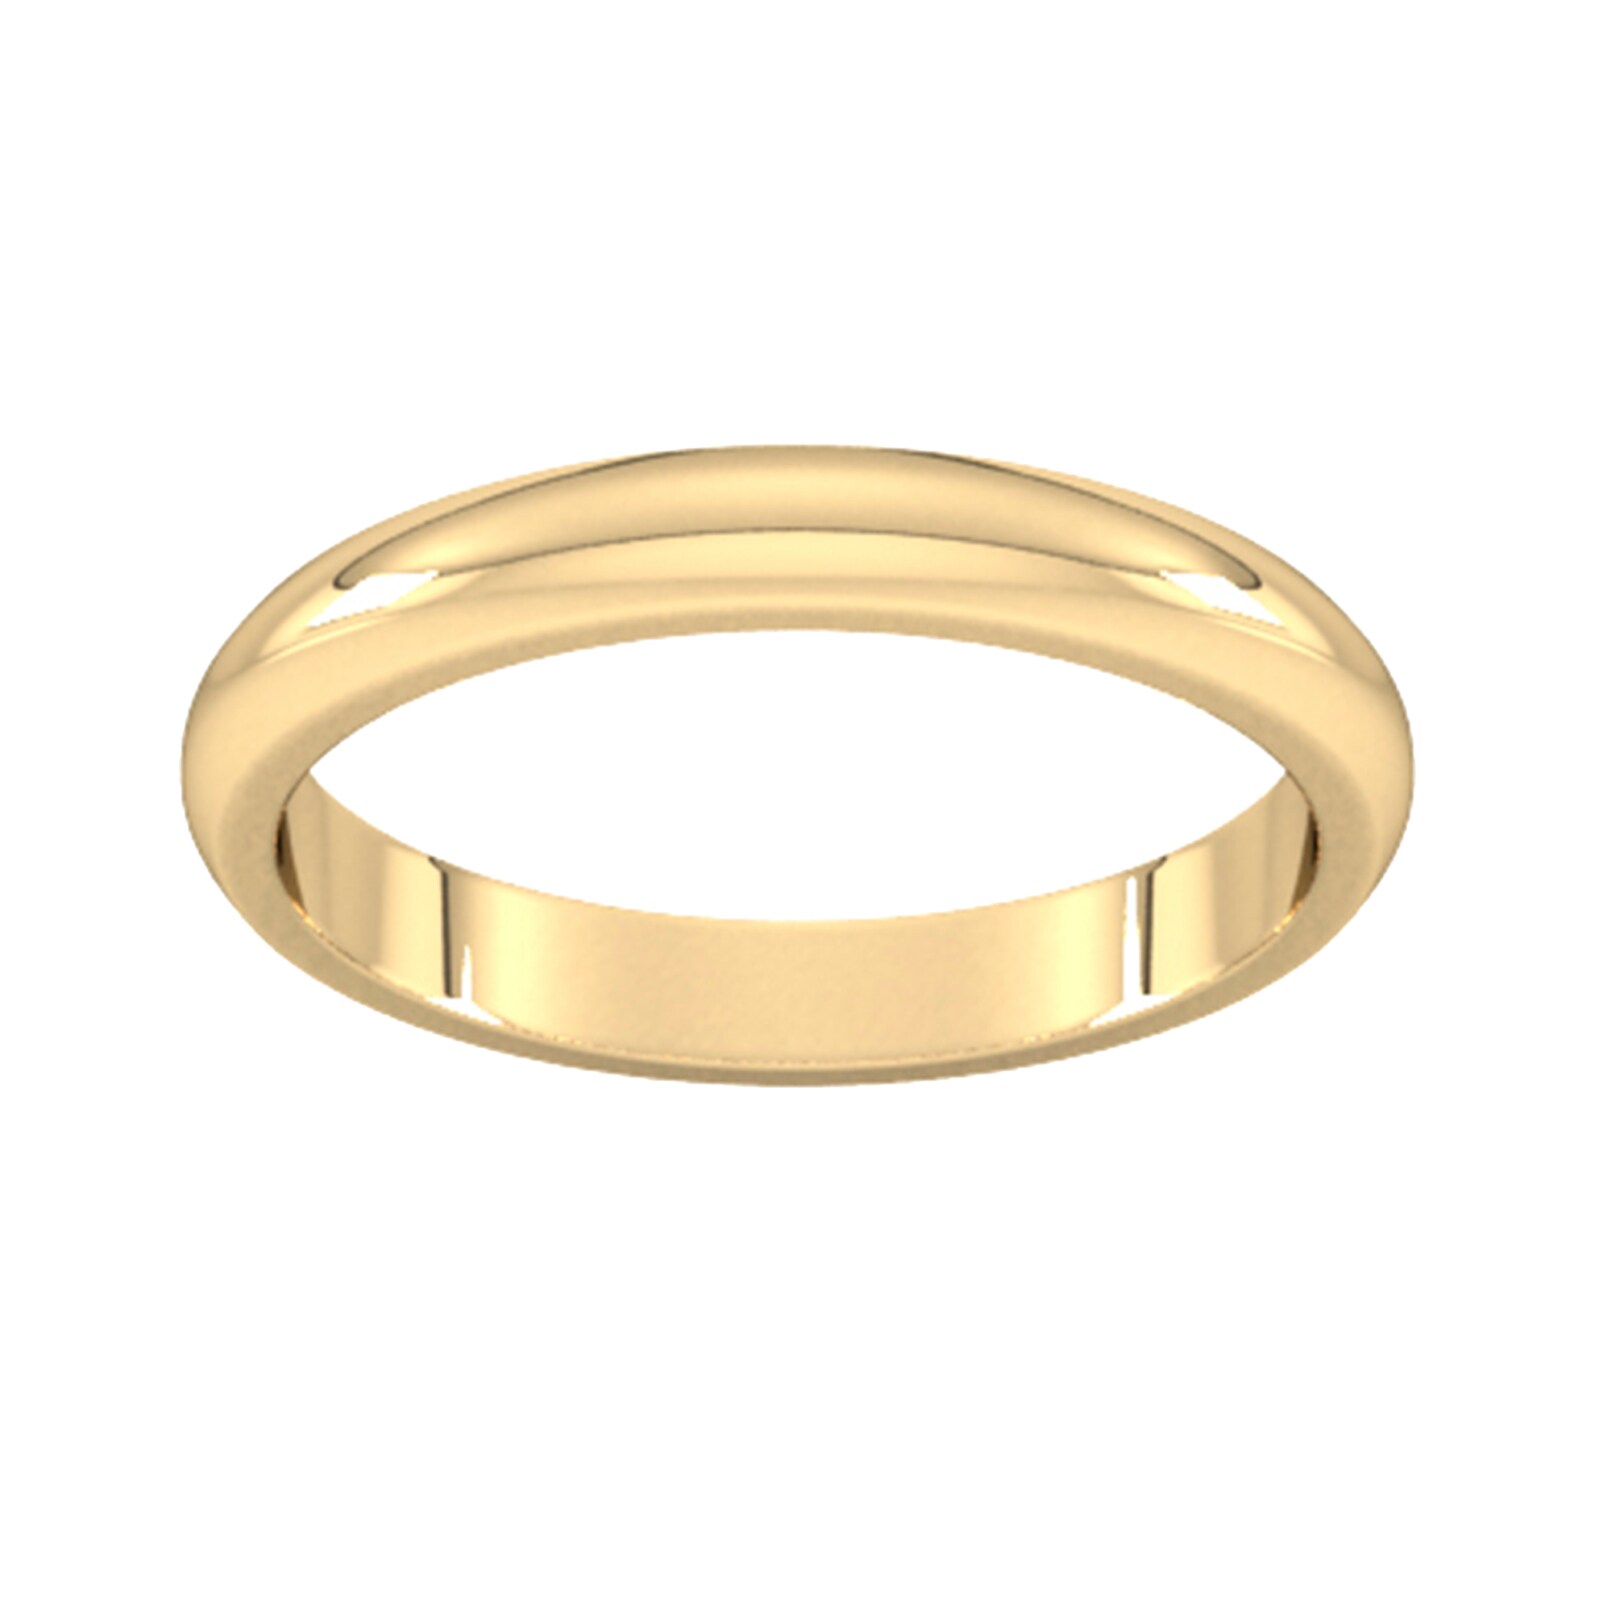 3mm D Shape Heavy Wedding Ring In 9 Carat Yellow Gold - Ring Size U